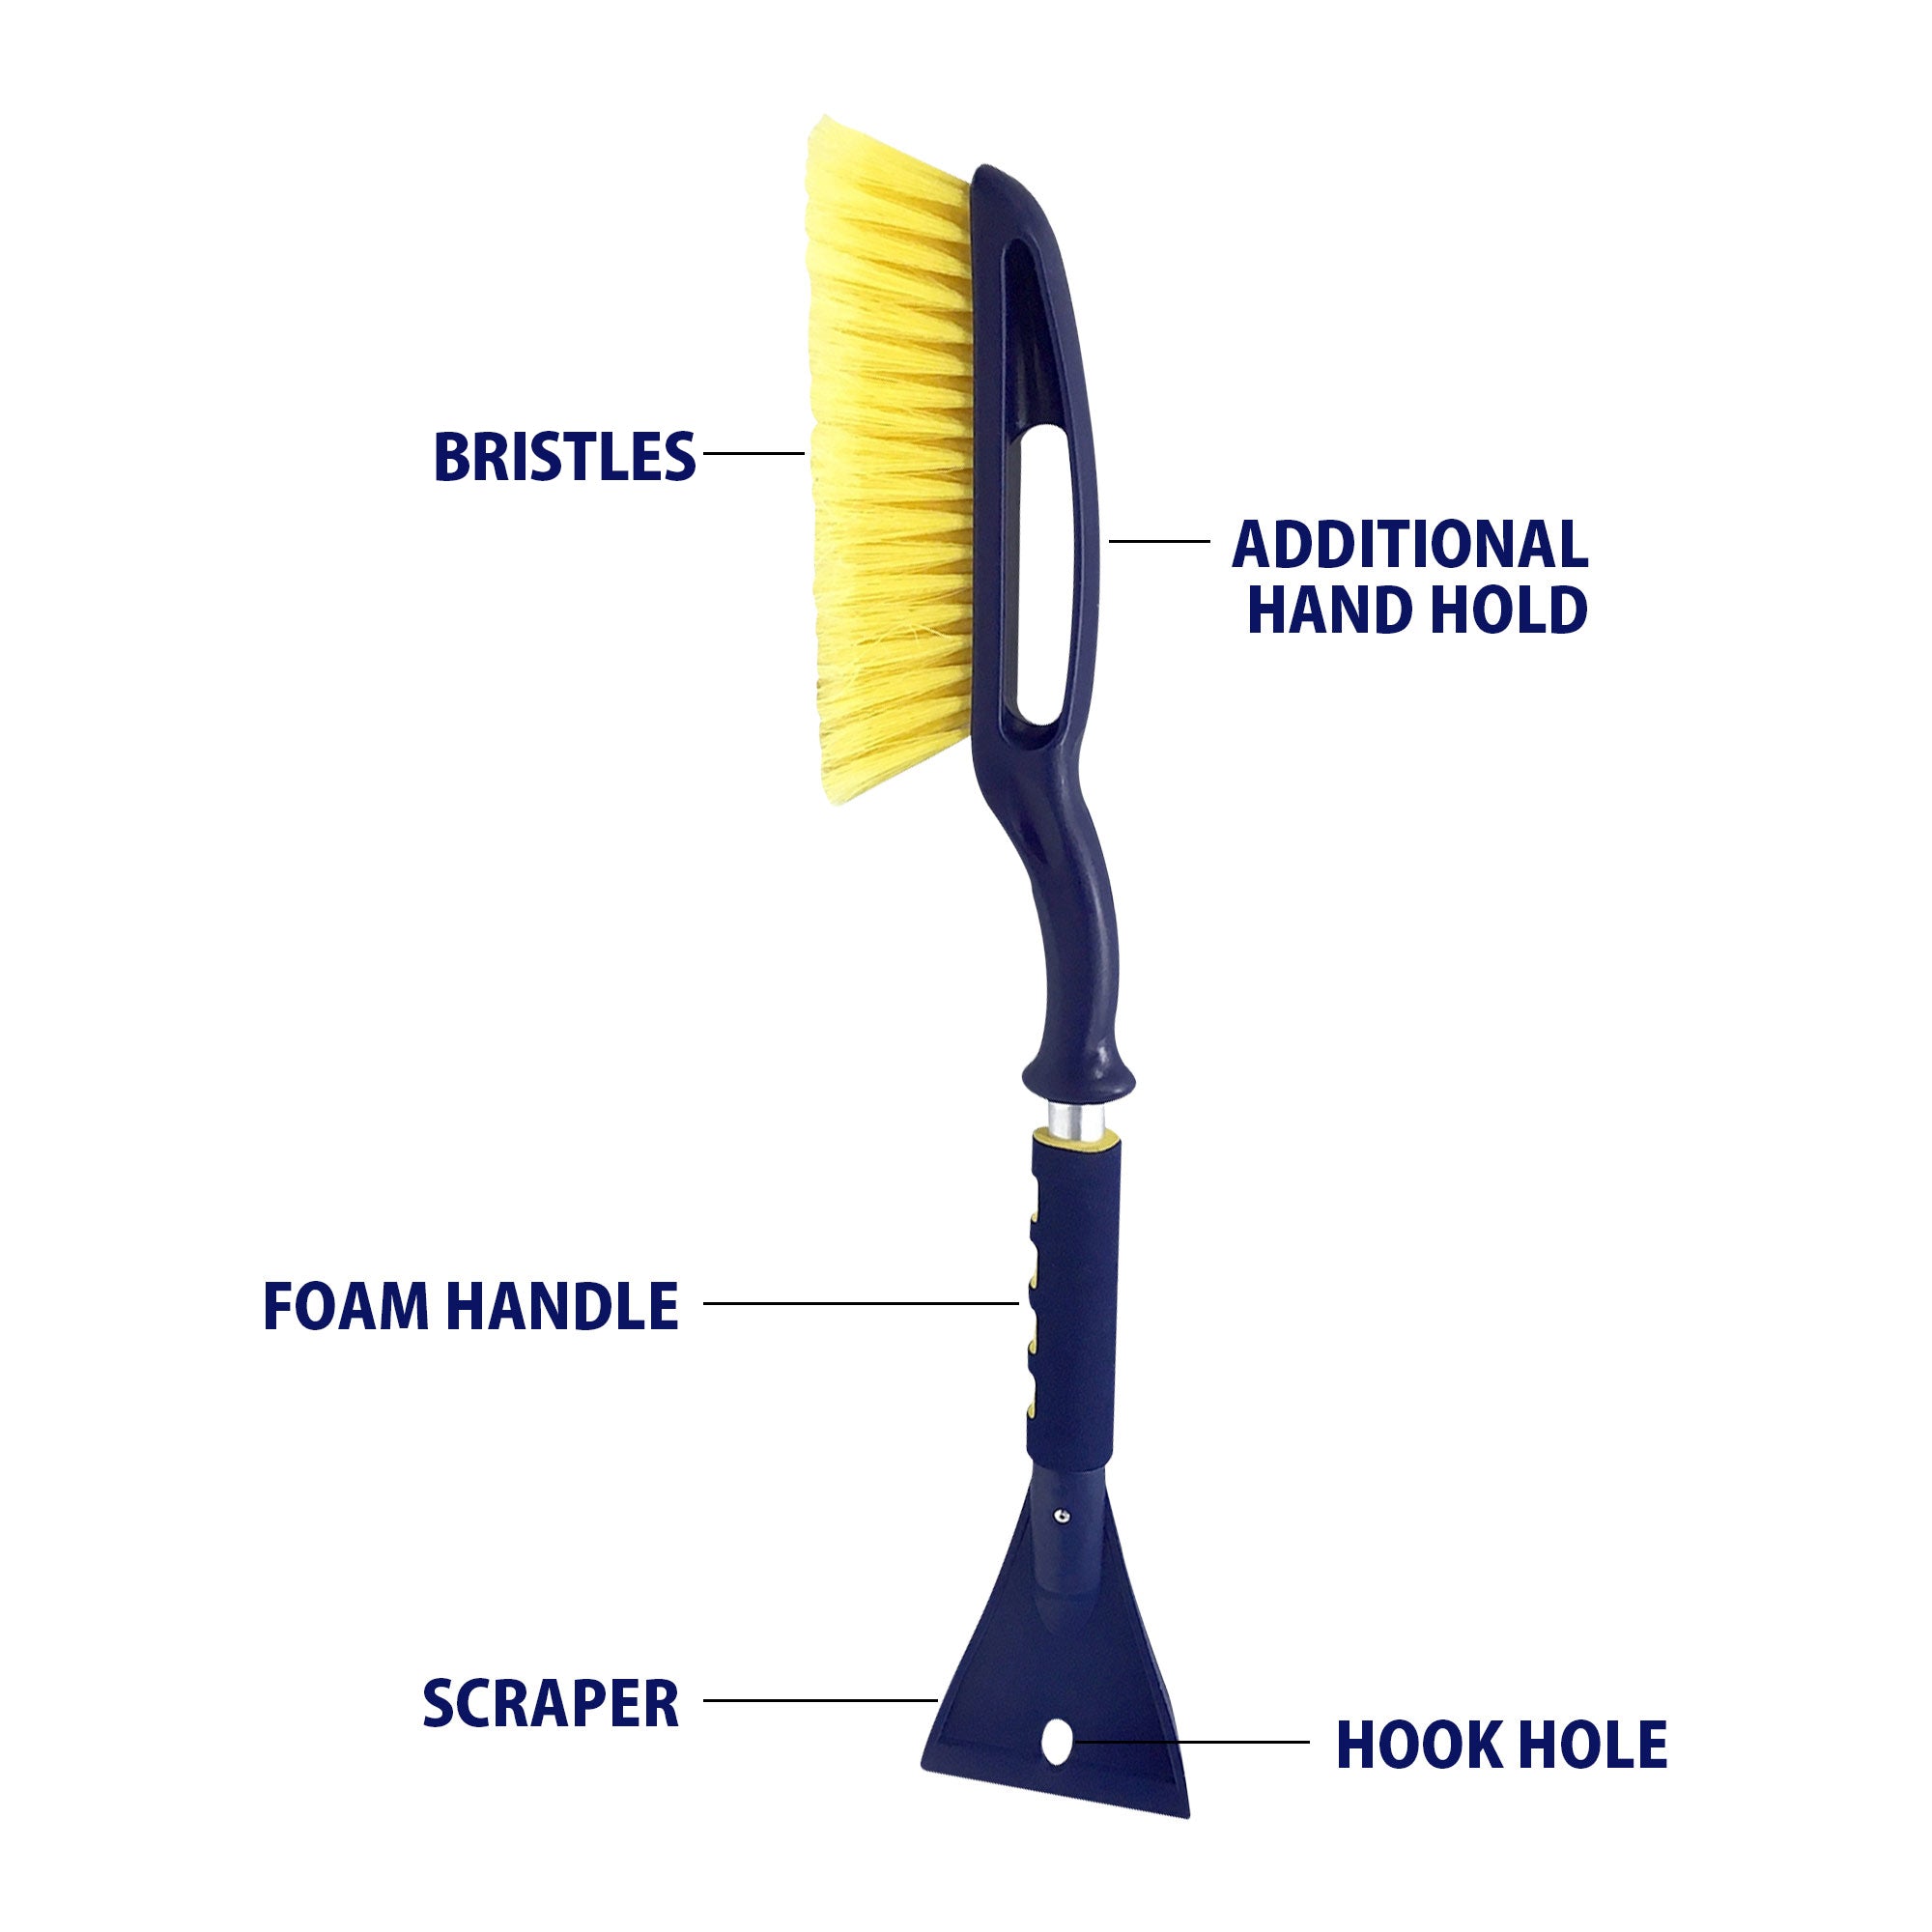 Product shot on white background of snow brush with parts labeled: Bristles; additional hand hold; hook hole; scraper; foam handle